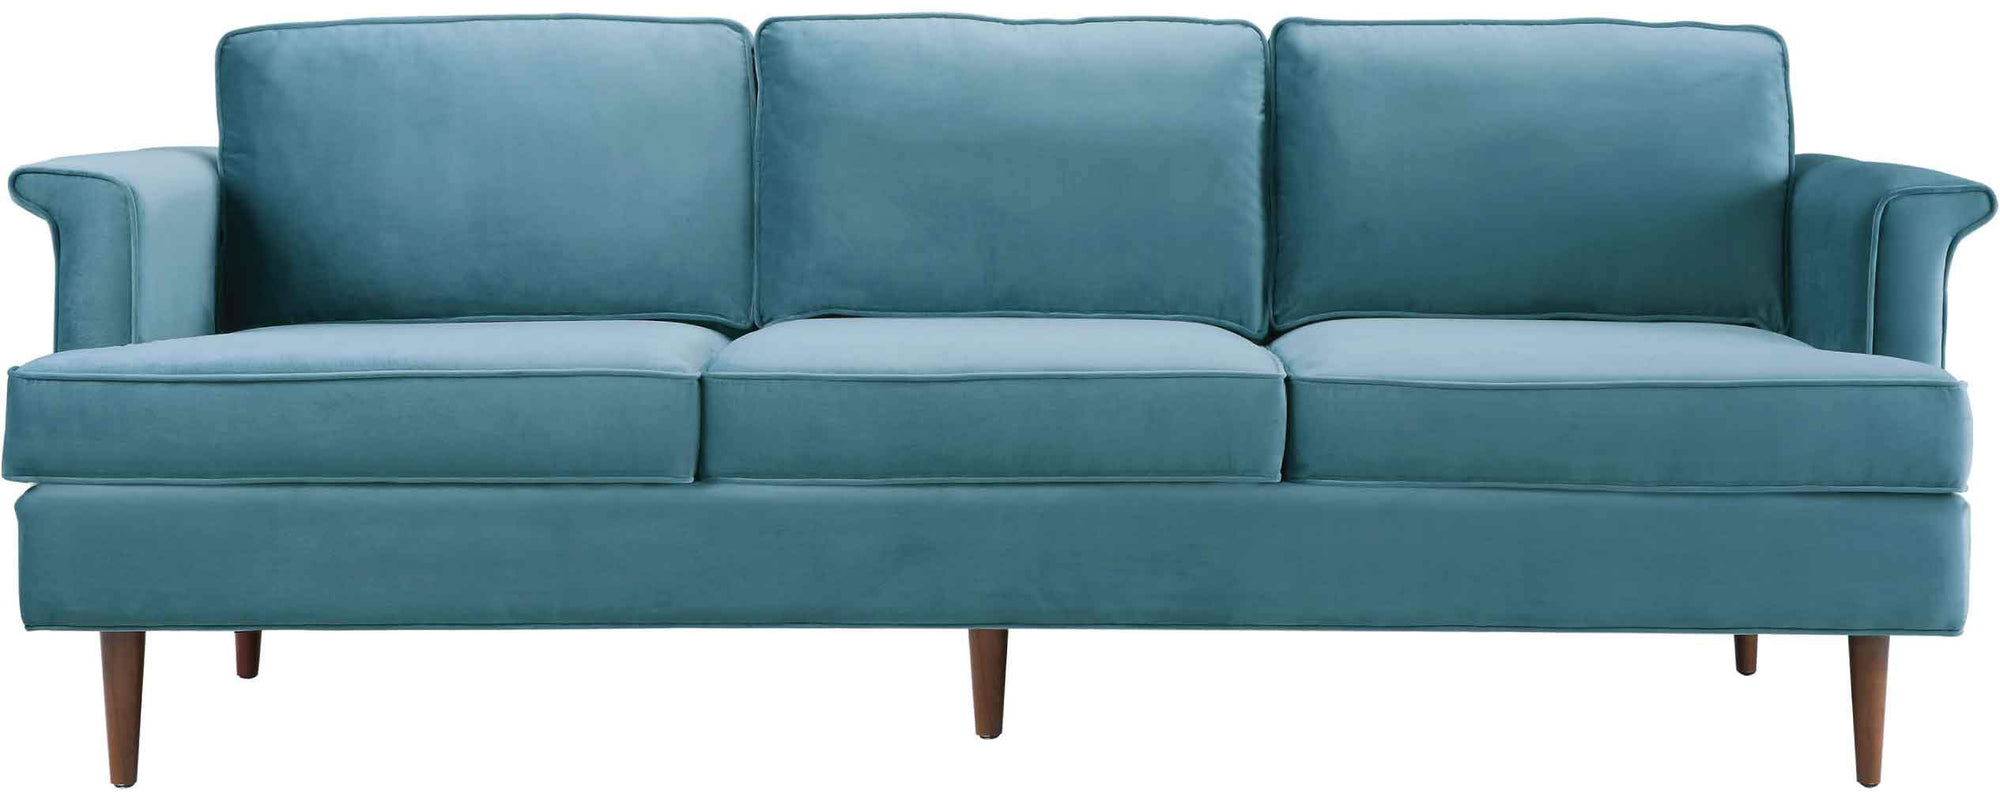 Couches from $289